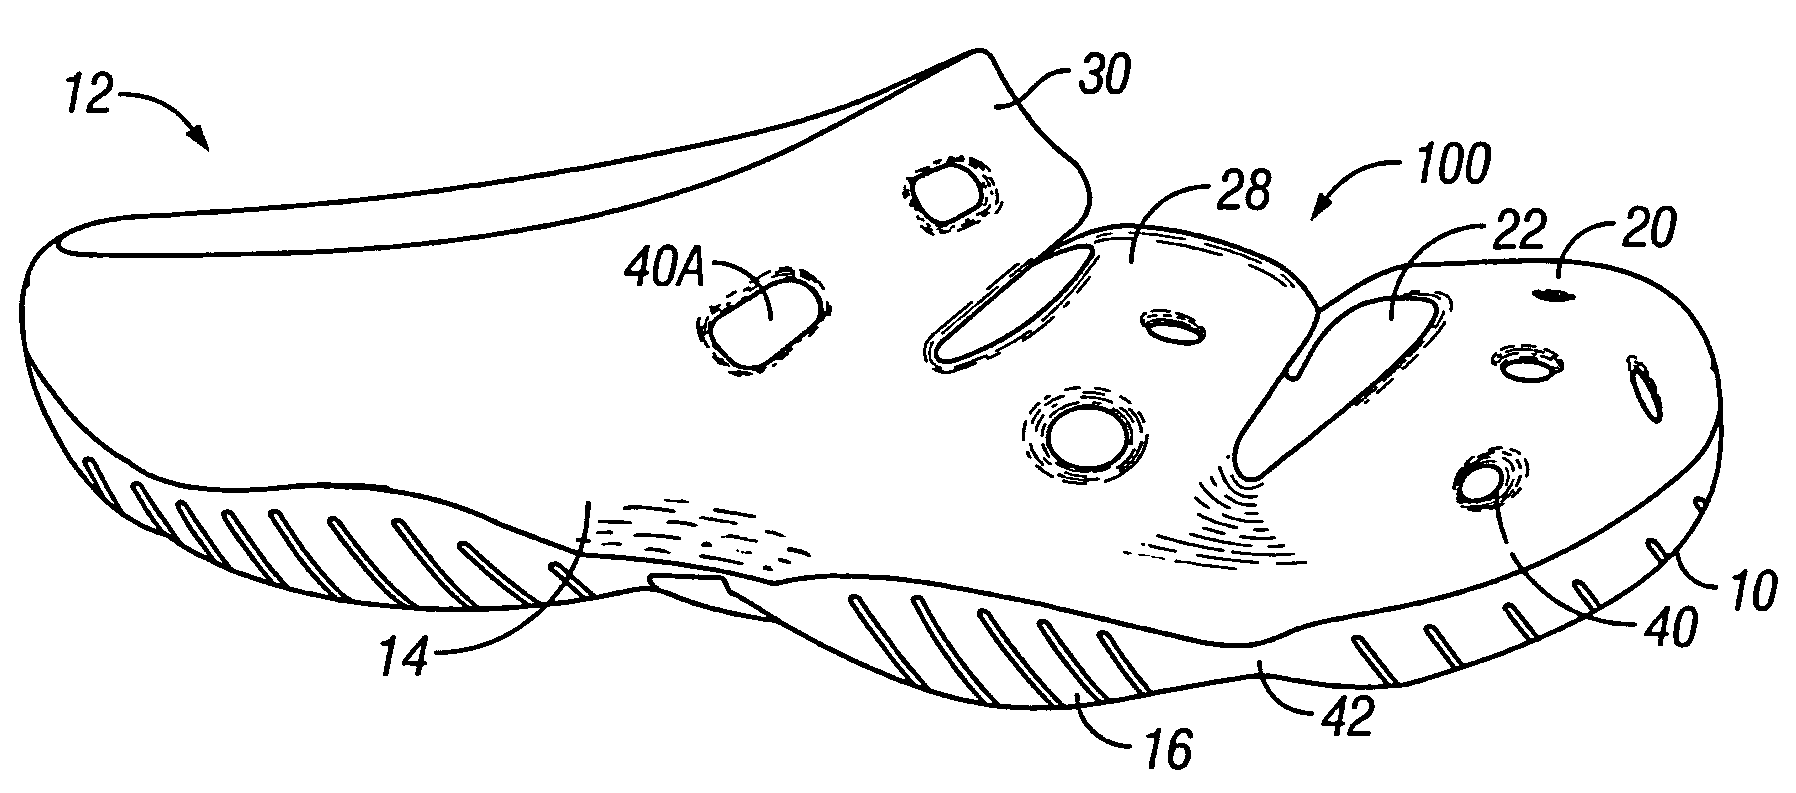 Footwear having an enclosed and articulated toe